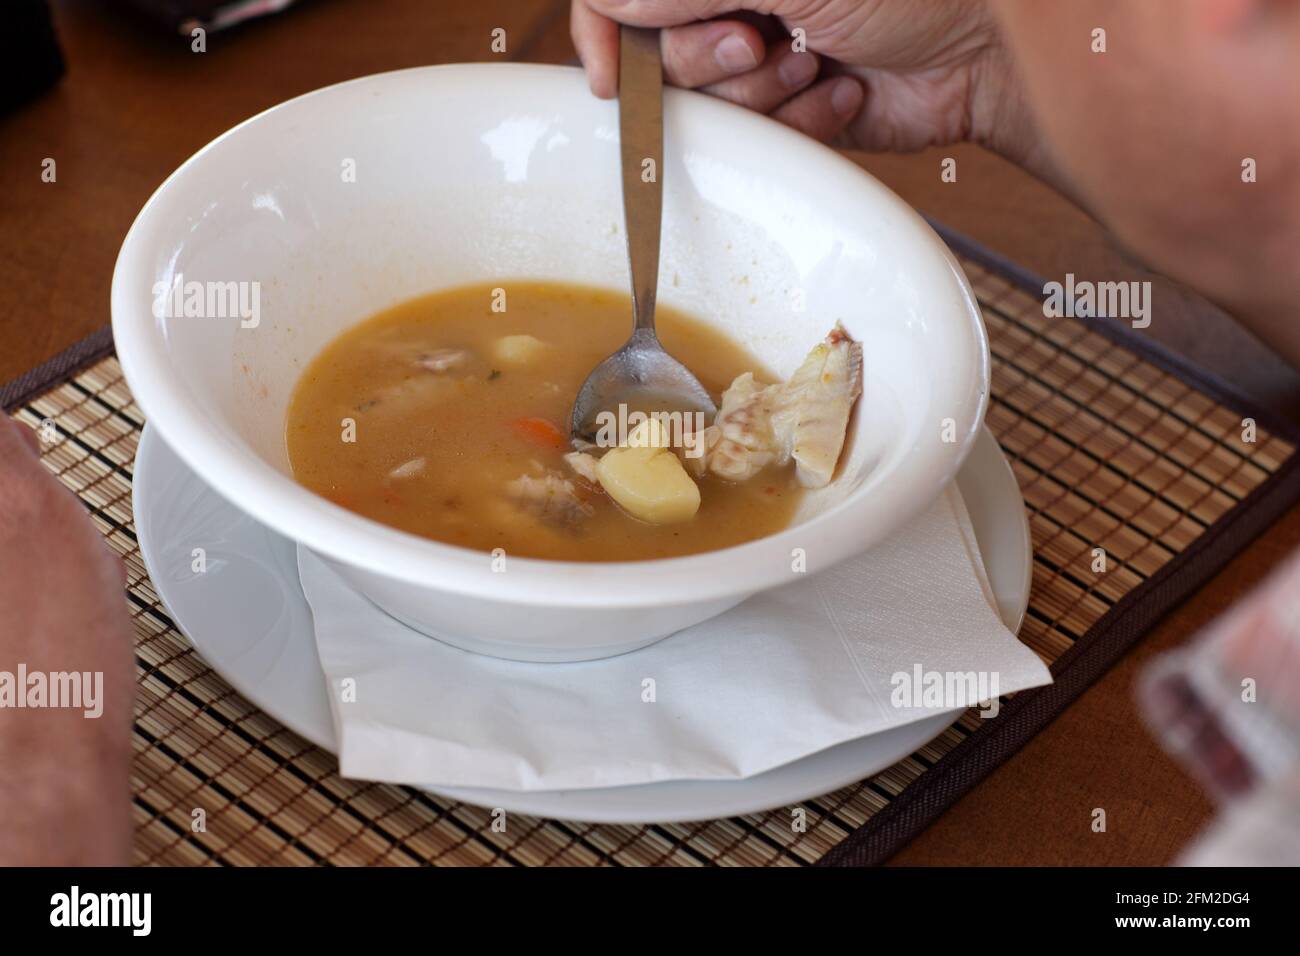 Man is eatign a fish soup in the restaurant Stock Photo